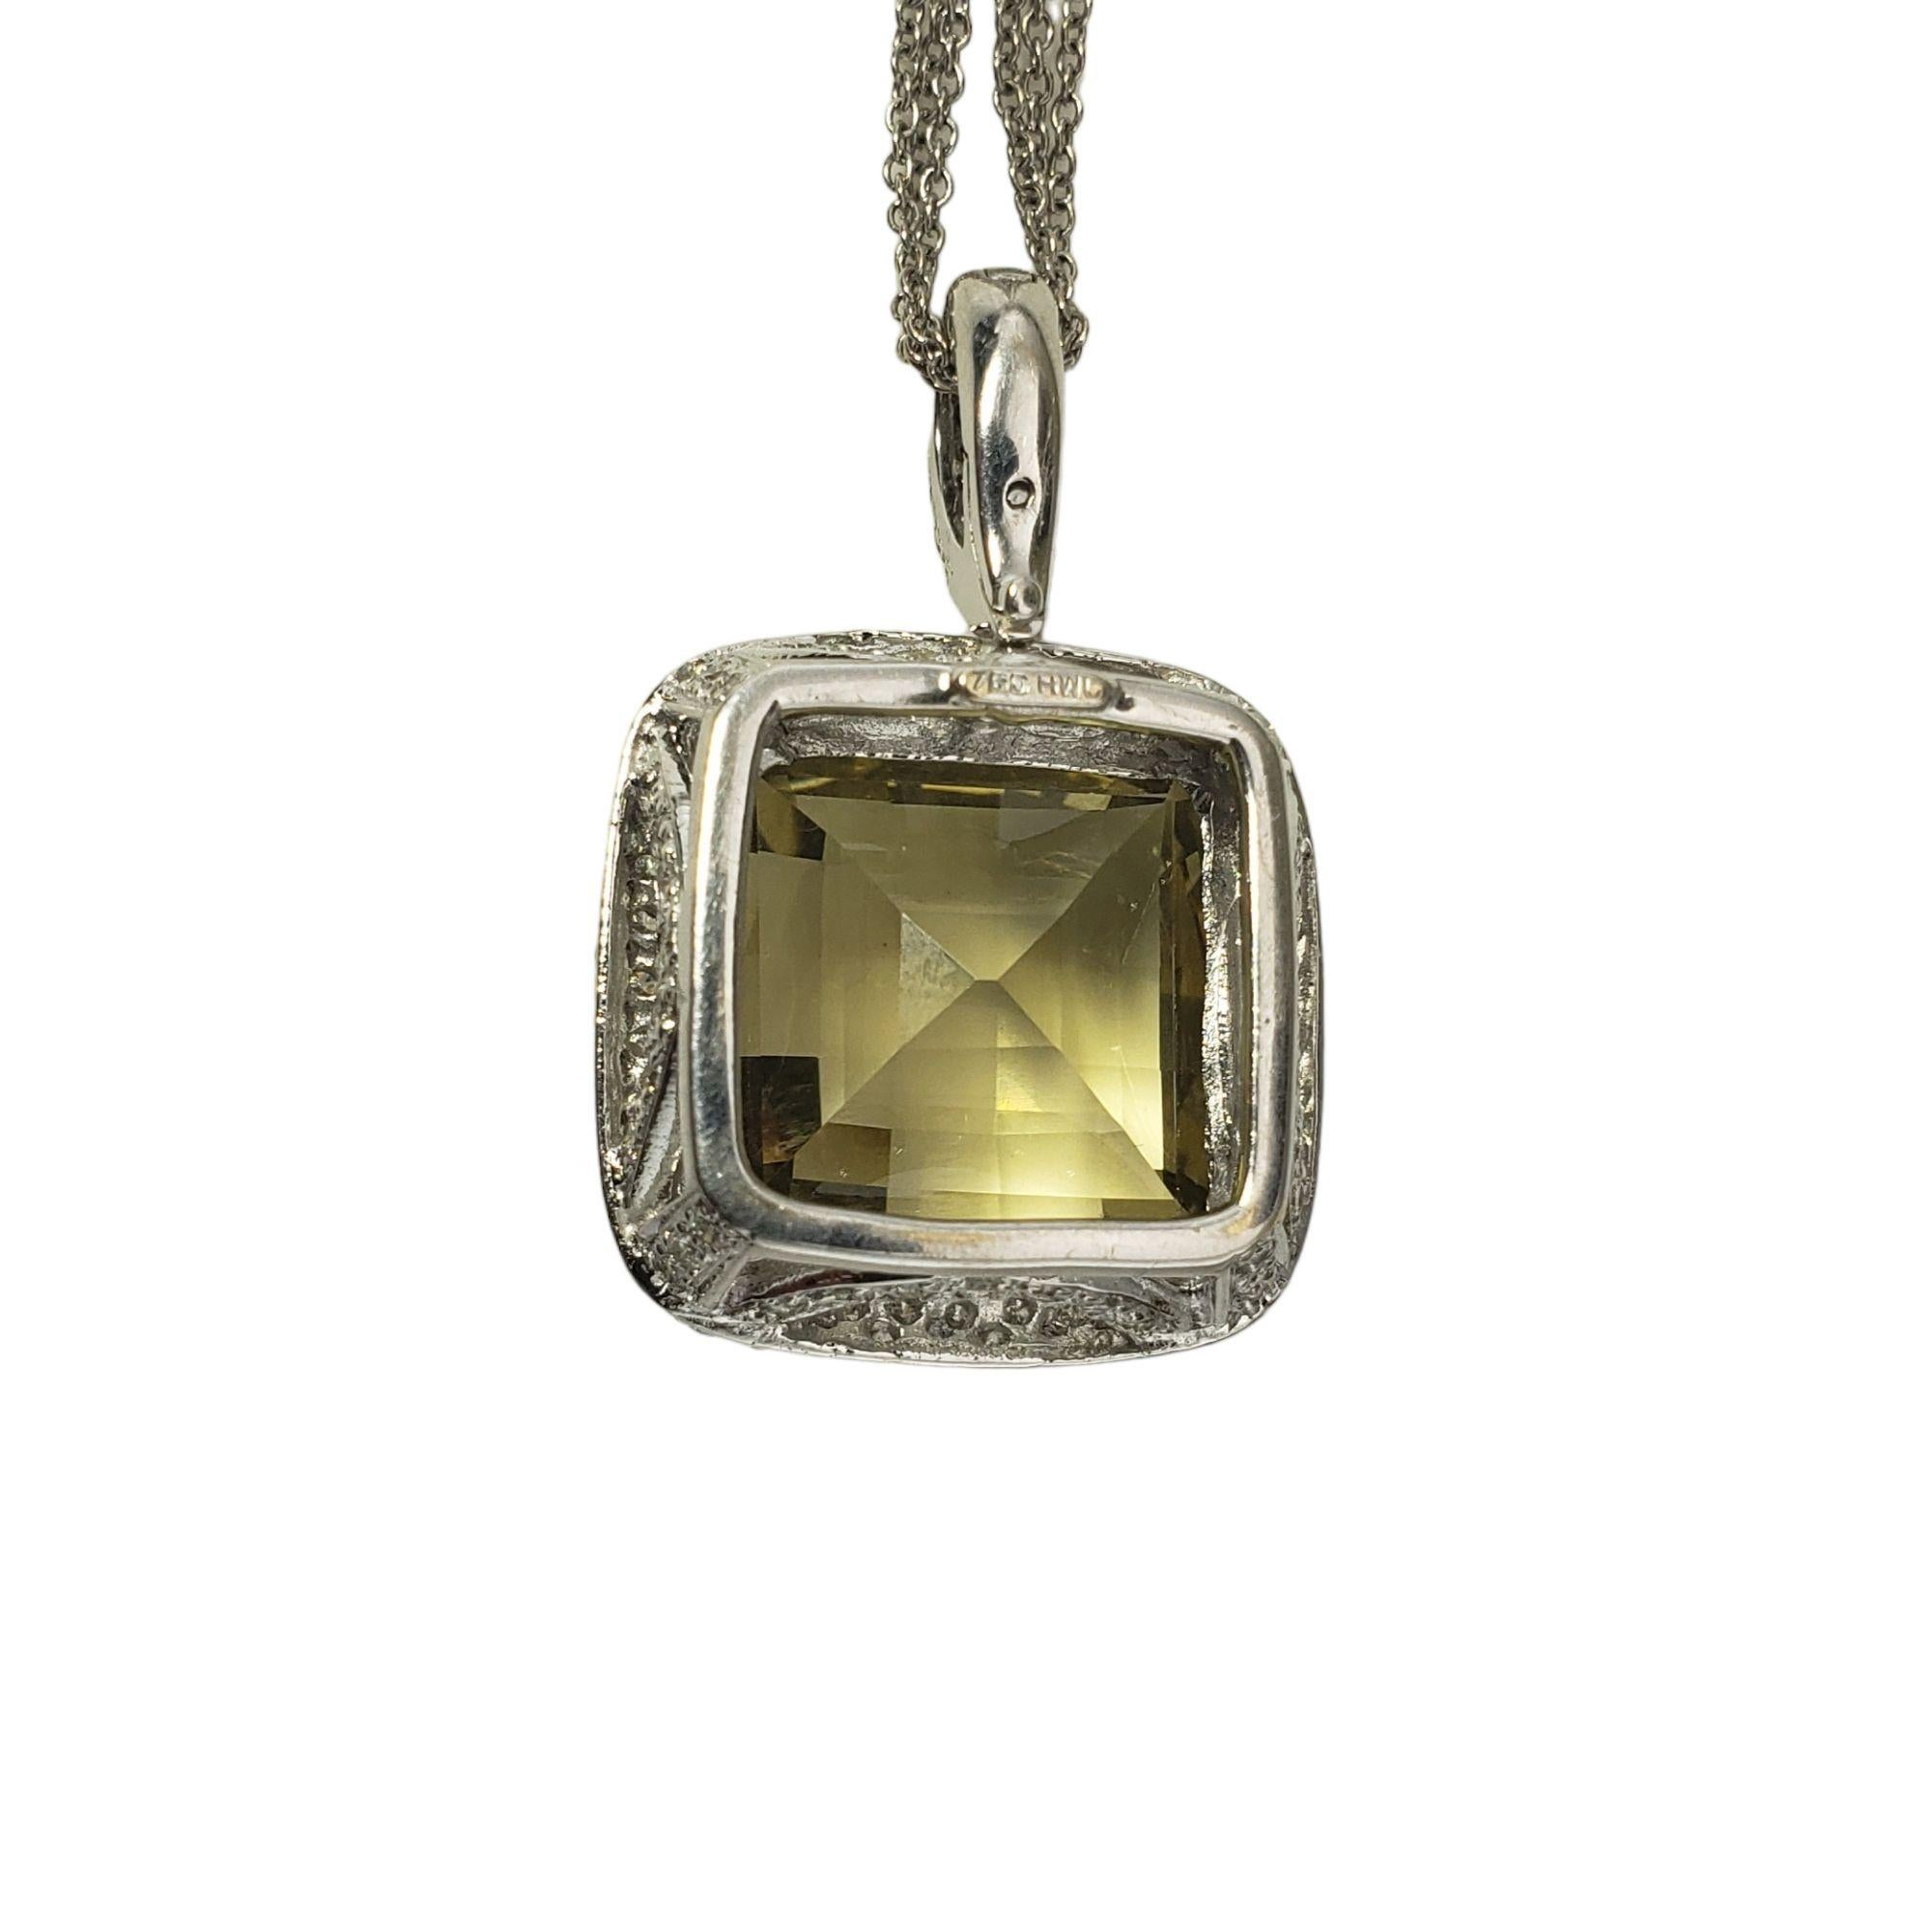 Vintage 18 Karat White Gold Yellow Quartz and Diamond Pendant Necklace JAGi Certified-

This stunning pendant features one cushion cut quartz and 124 round brilliant cut diamonds set in beautifully detailed 14K white gold. Suspends from a triple